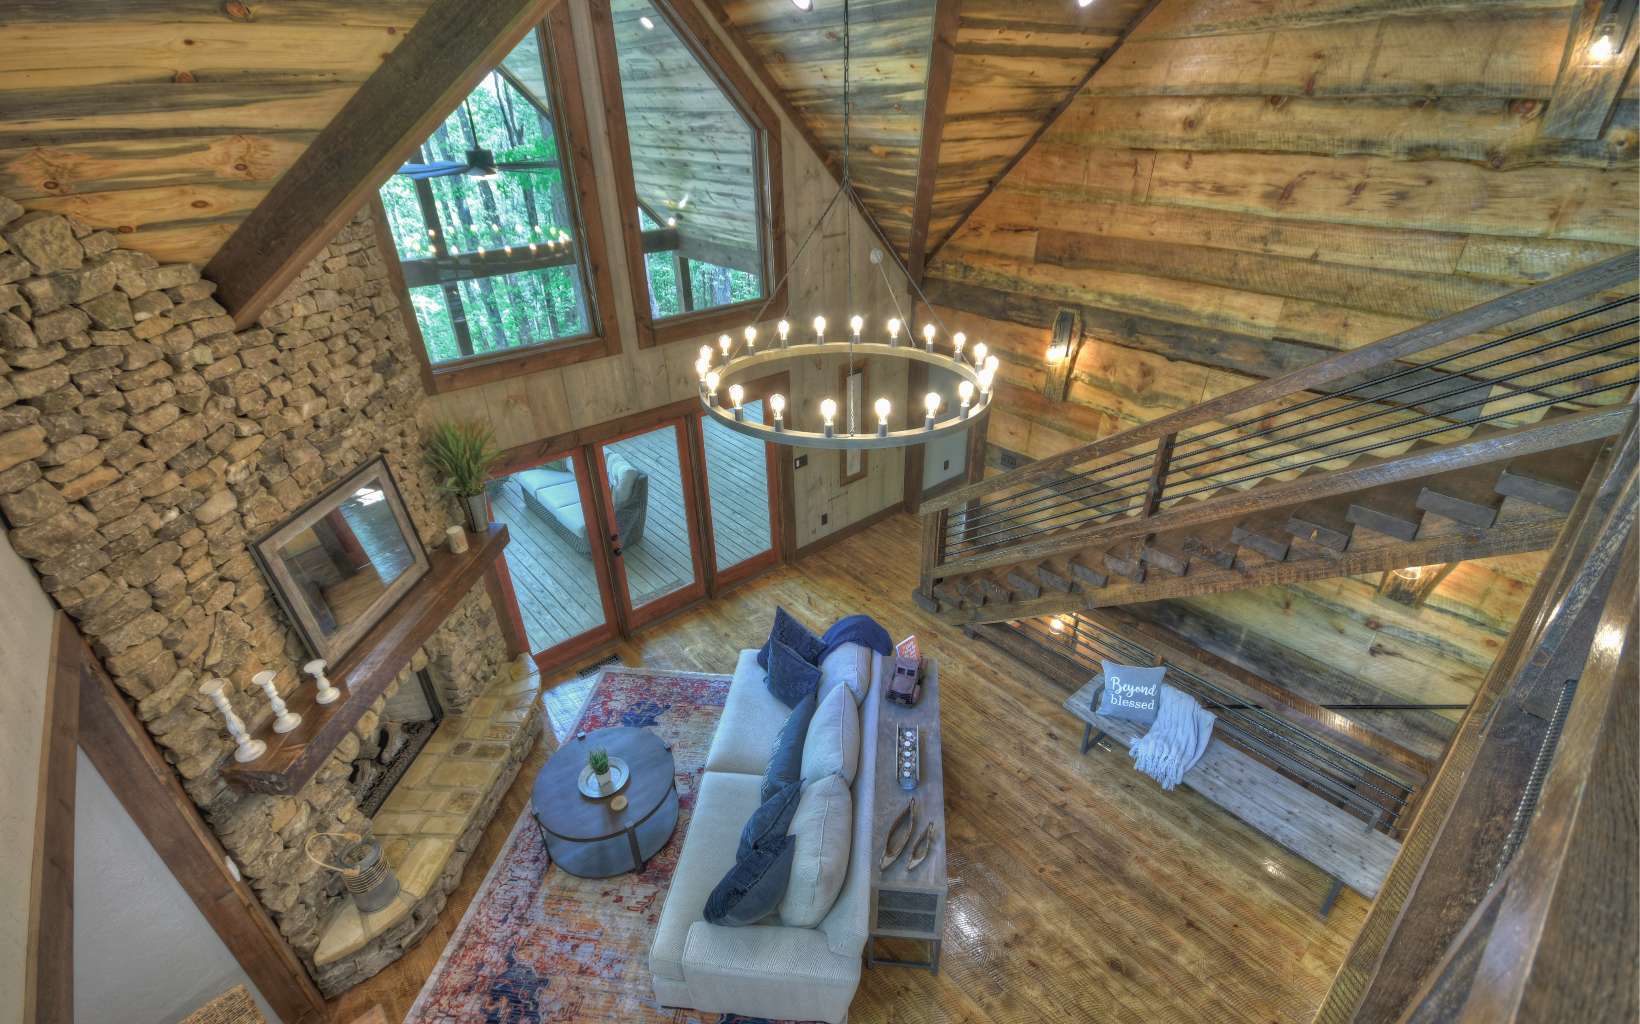 Beautifully designed and constructed by Marc Nicholson, this mountain masterpiece is sure to WOW you! You'll find a rustic mix of wood and sheetrock interior w/ granite countertops, custom stonework & hardwood floors throughout. Each of the 3 levels boast a private suite plus additional sleeping space upstairs in the large open loft w/ 2 sets of built-in bunk beds! The chef's kitchen offers an oversized island, Viking Appliances and farmhouse sink. An open concept floorplan allows room to entertain on the main level with French Doors that expand to a huge, covered deck w/ stone fireplace, outdoor living & dining rooms. Full finished terrace level also opens to a second expansive deck space. Located in the heart of the Aska Adventure Area with deeded access to Lake Blue Ridge, this property has established rental history & would make an incredible full time home or investment property!